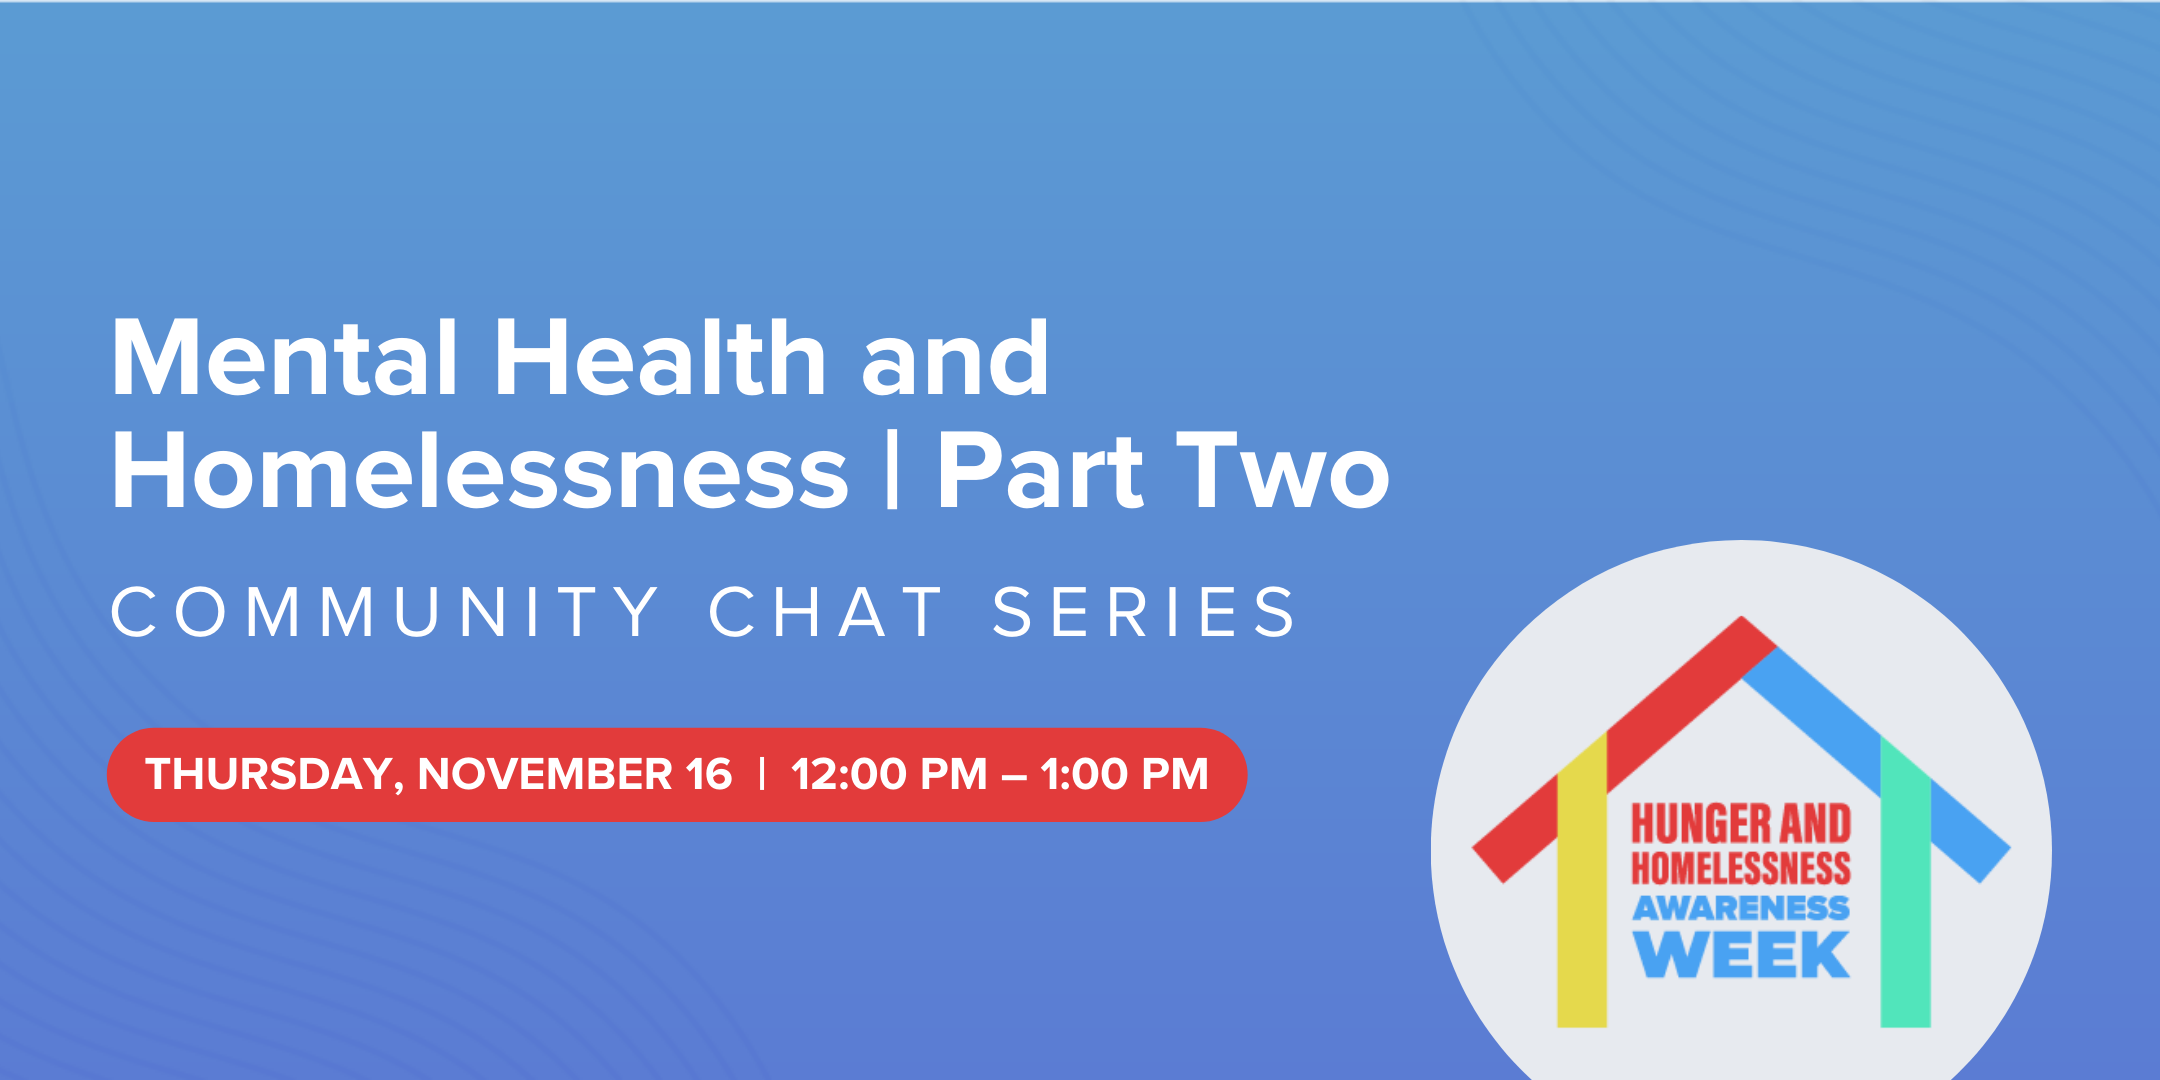 Mental Health and Homelessness Part Two Community Chat